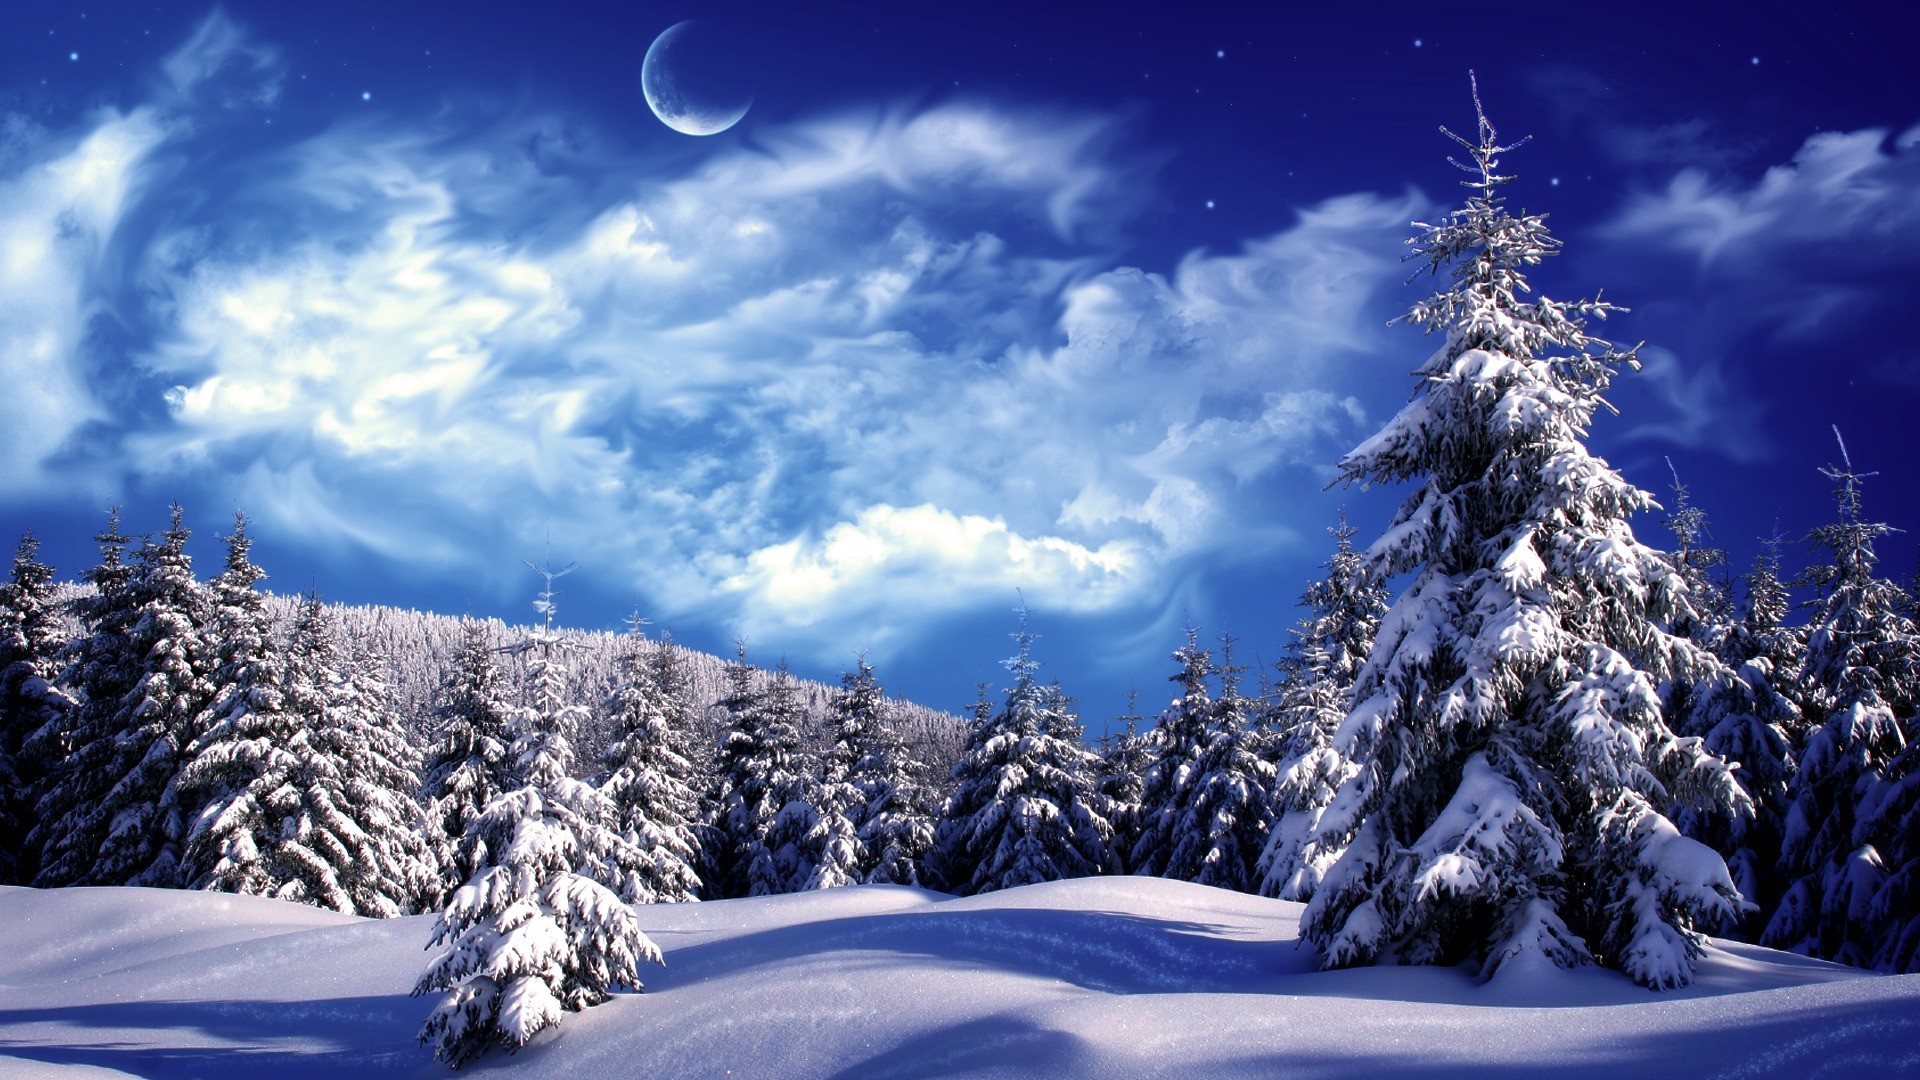 1080P Snow Wallpapers